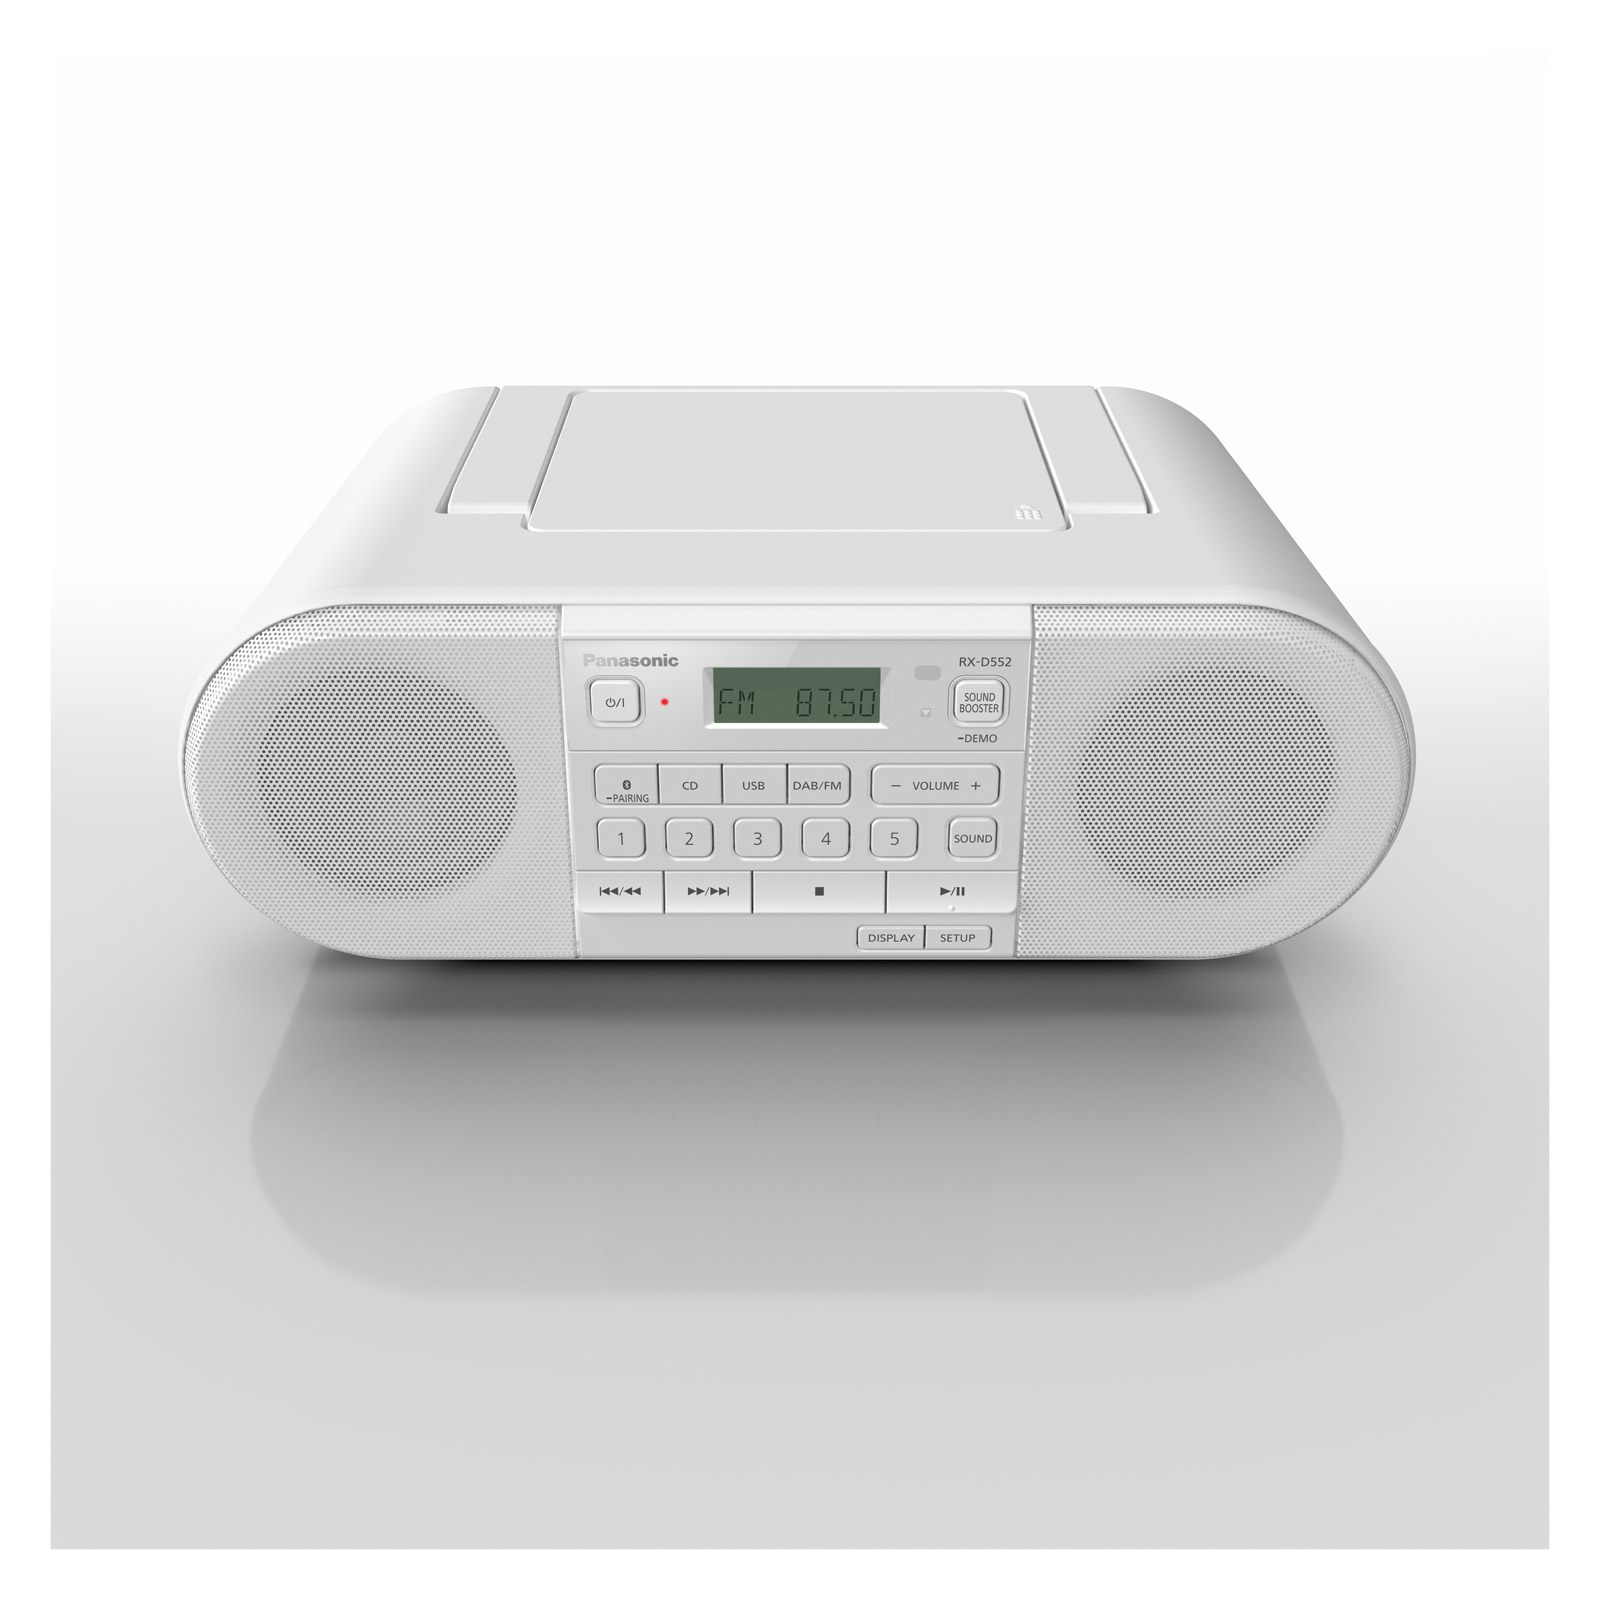 Image of Panasonic RX D552E W Portable Stereo CD System in White DAB Bluetooth